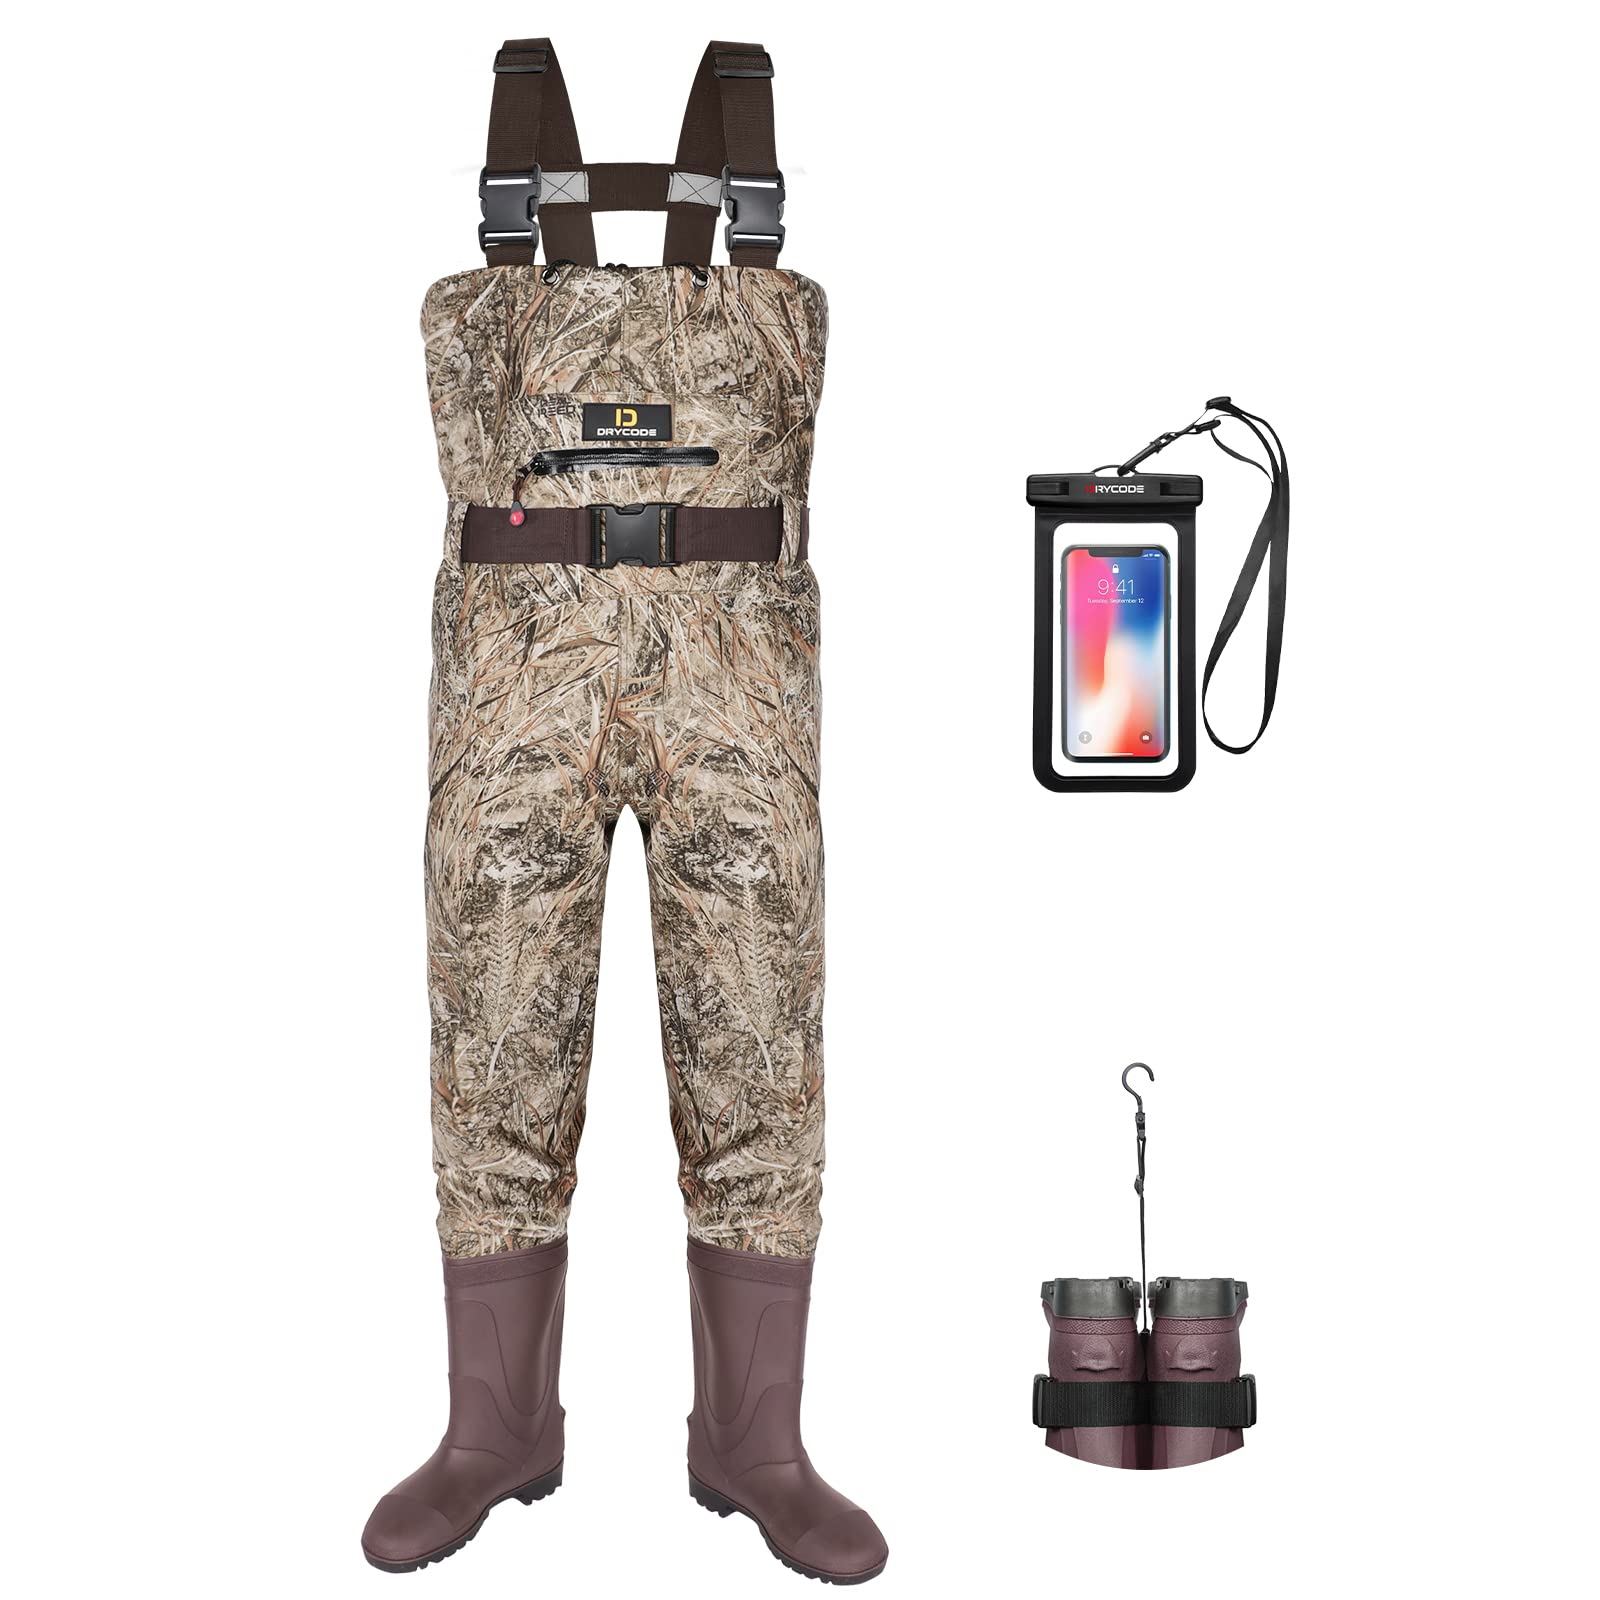 DRYCODE Waders for Men, Chest Waders for Men with Boots Waterproof